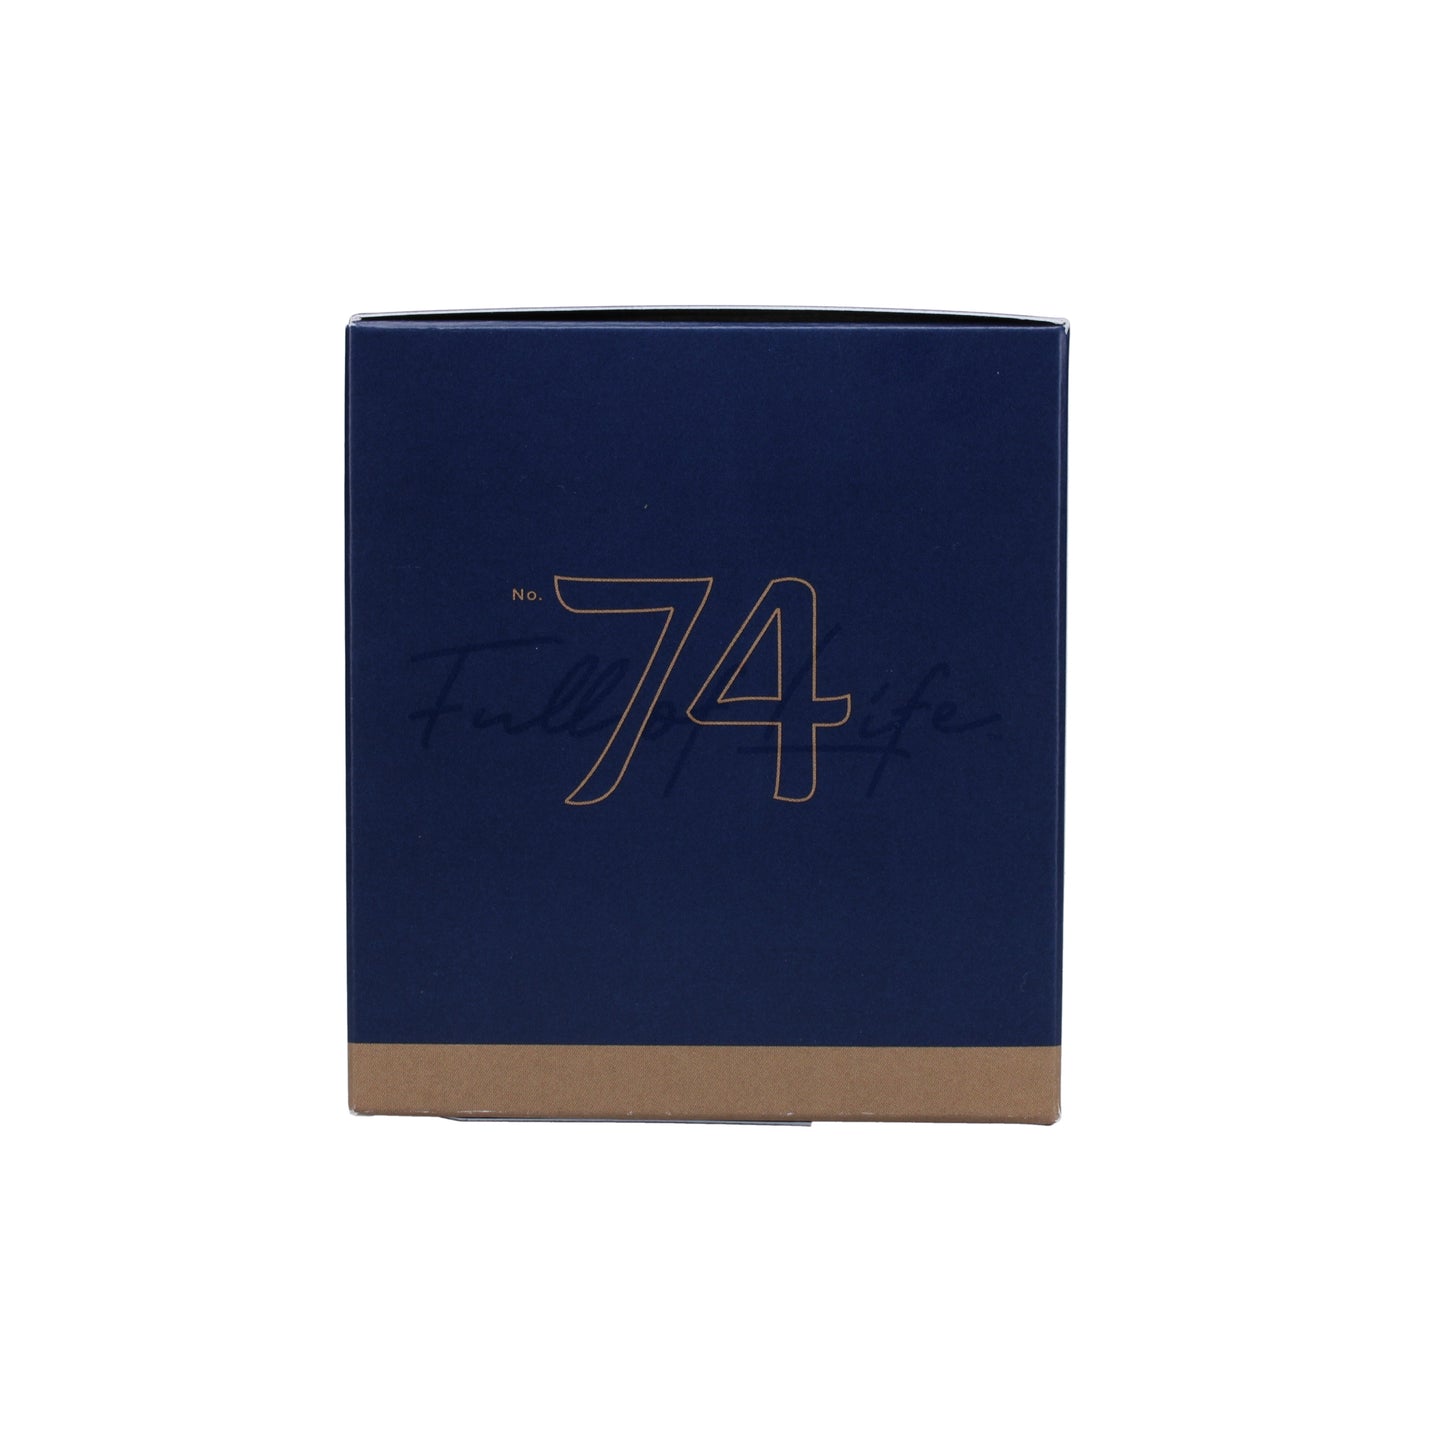 No. 74 Tabac & Leather 7 oz. Candle in Signature Box Image 5